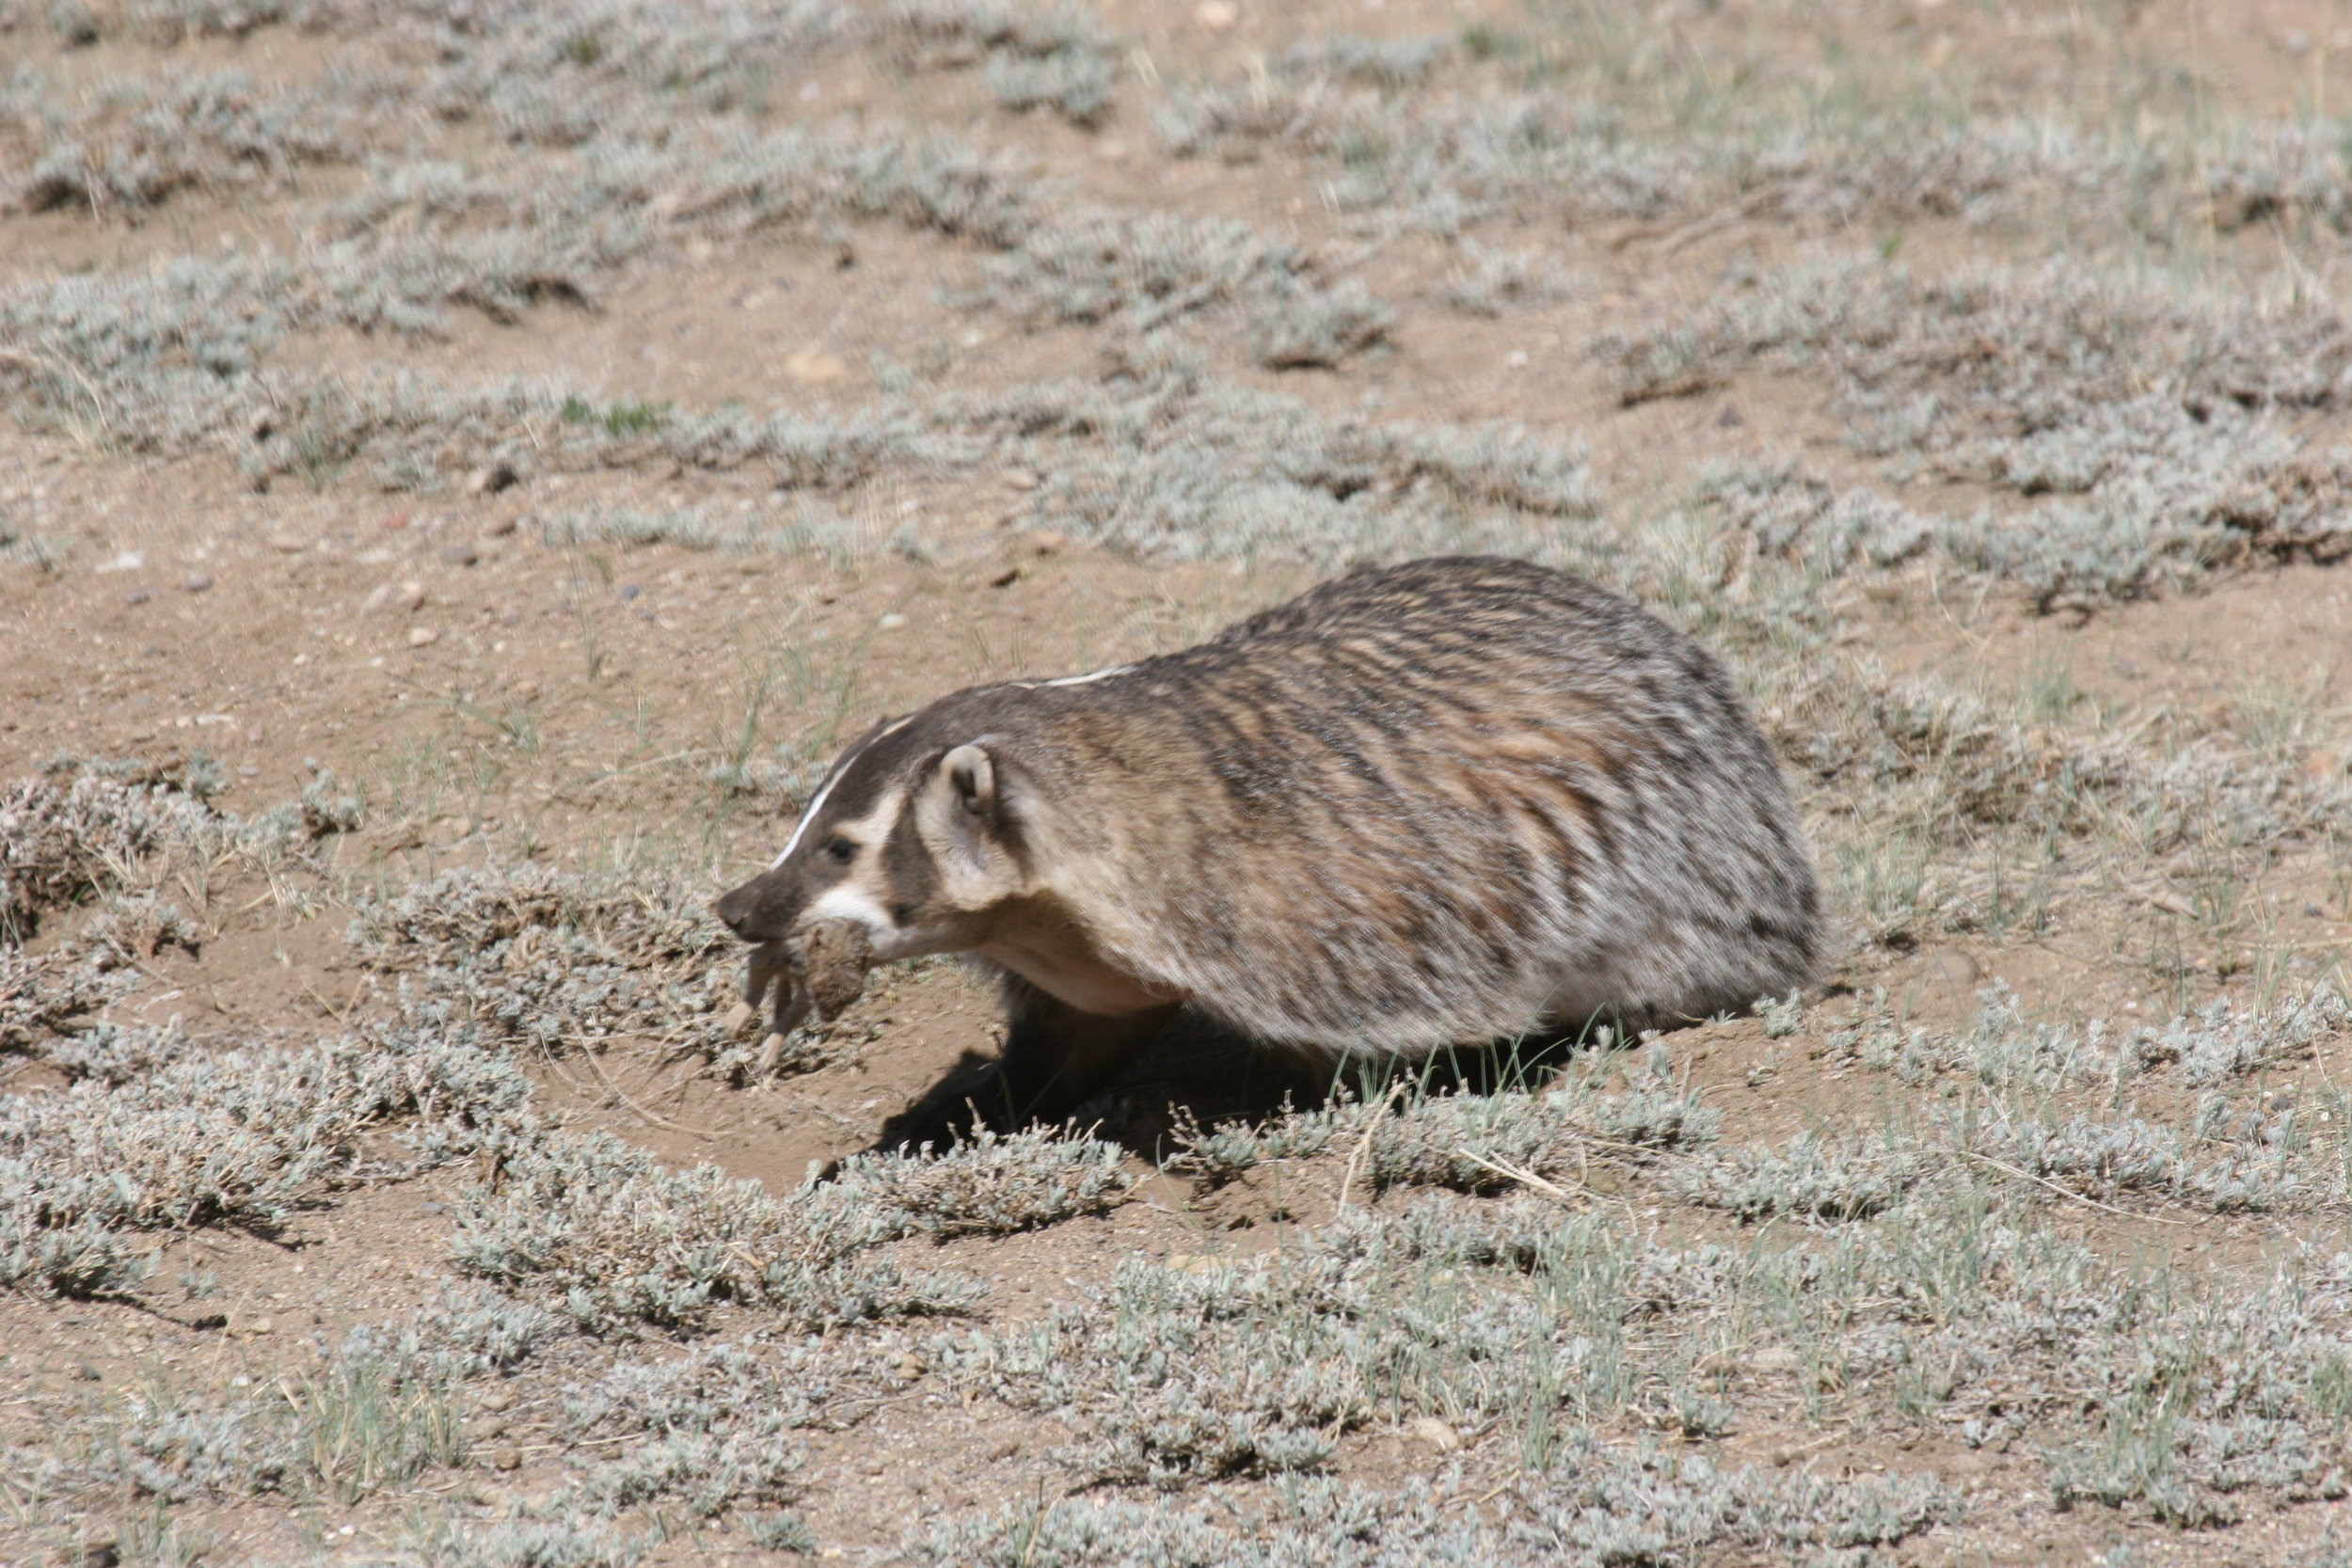  A badger comes home with a juvenile prairie dog in her jaws.  ©John Hoogland 2012  